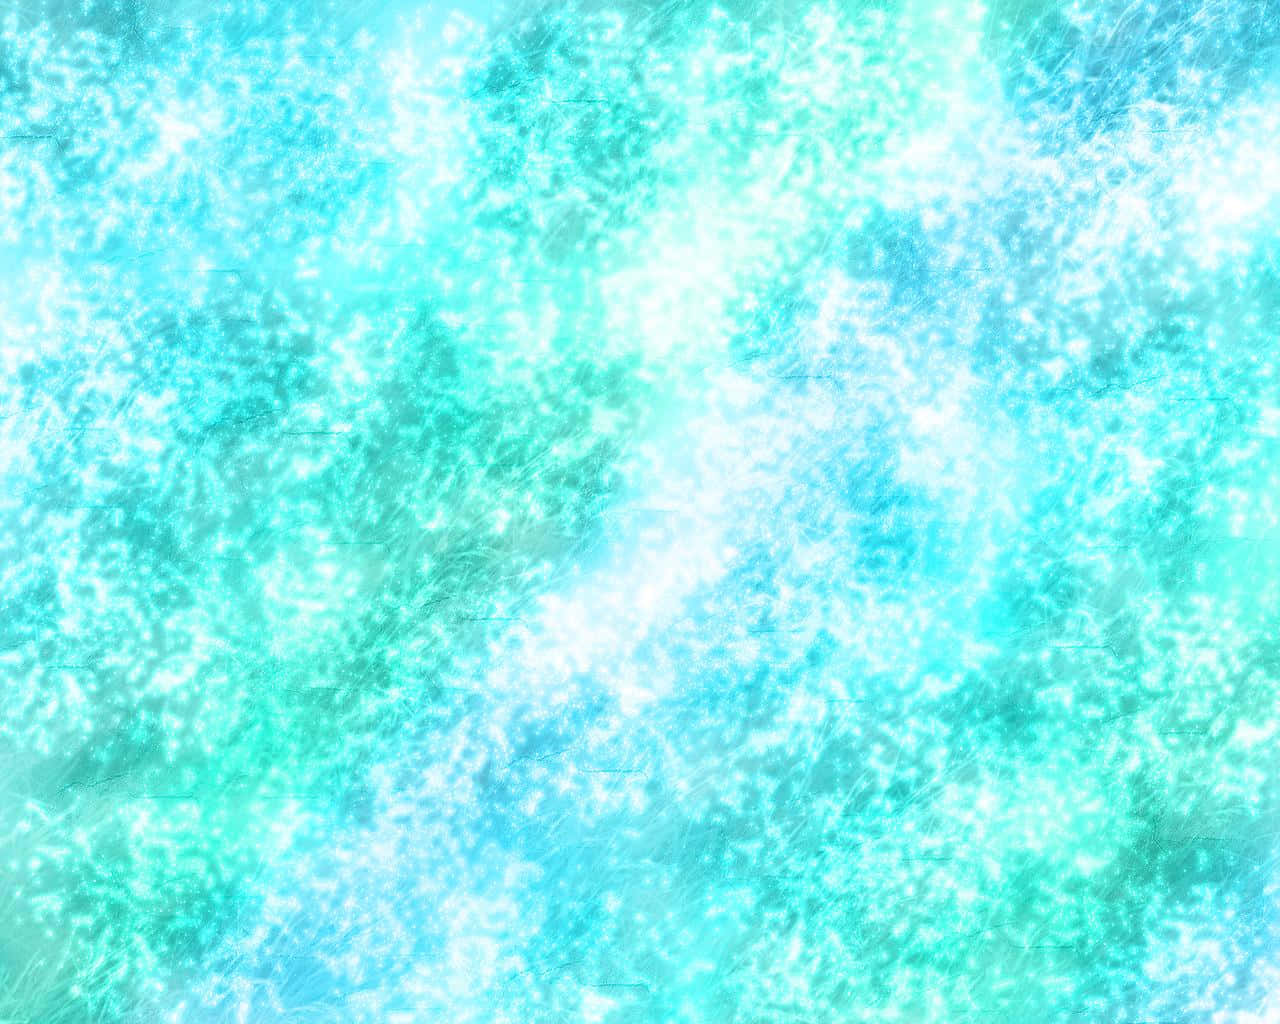 "Add a sparkly touch to your next project with this beautiful background"